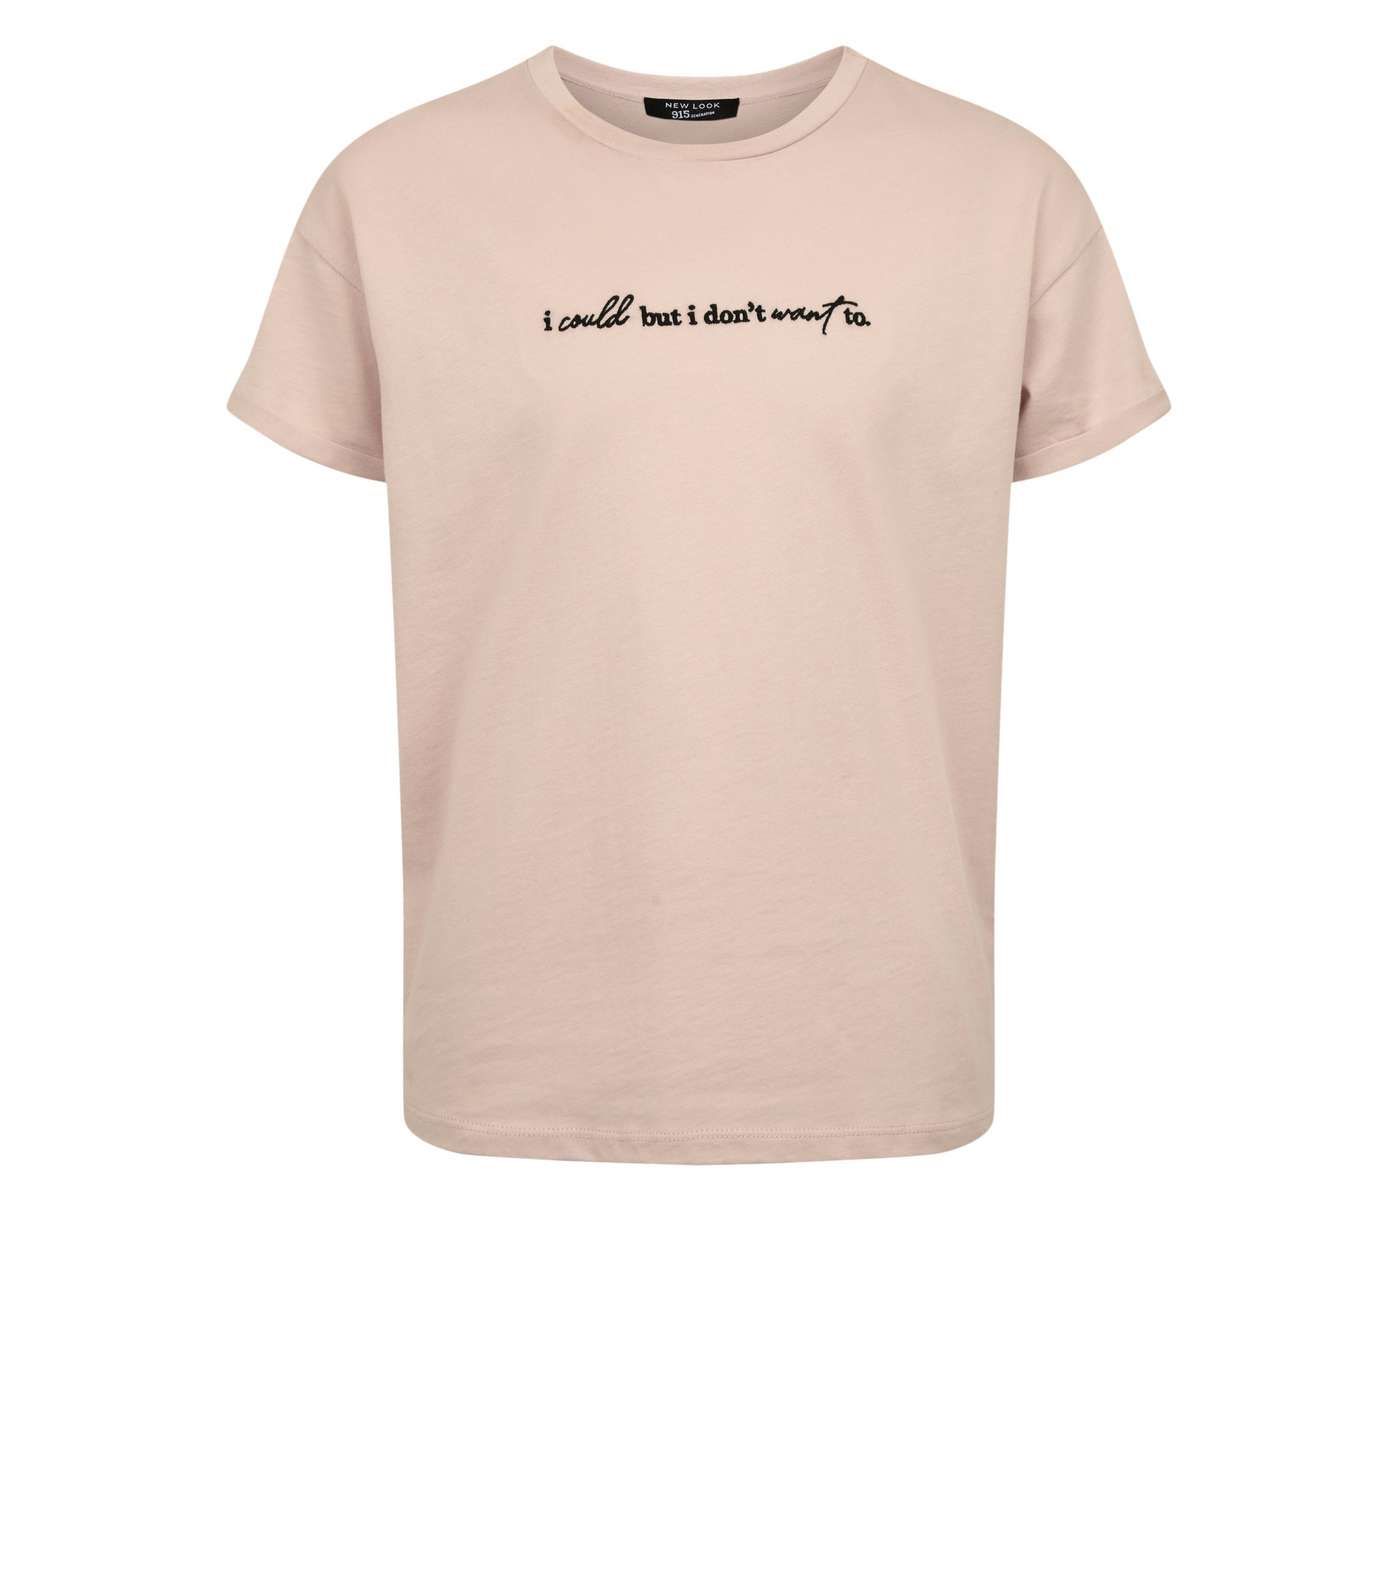 Girls Pale Pink I Don't Want To Slogan T-Shirt Image 4